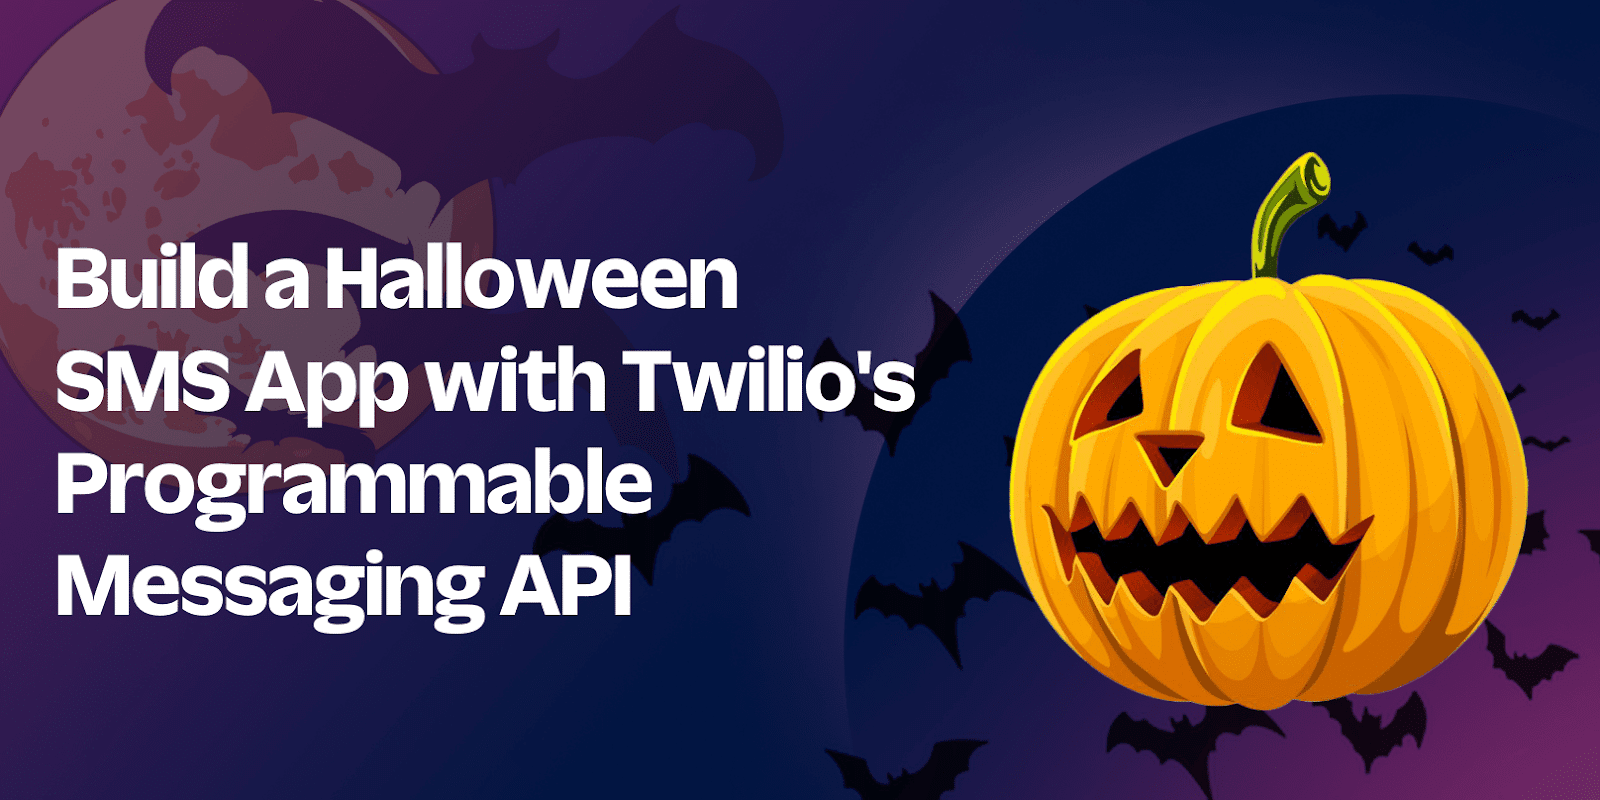 Build a Halloween SMS App with Twilio's Programmable Messaging API